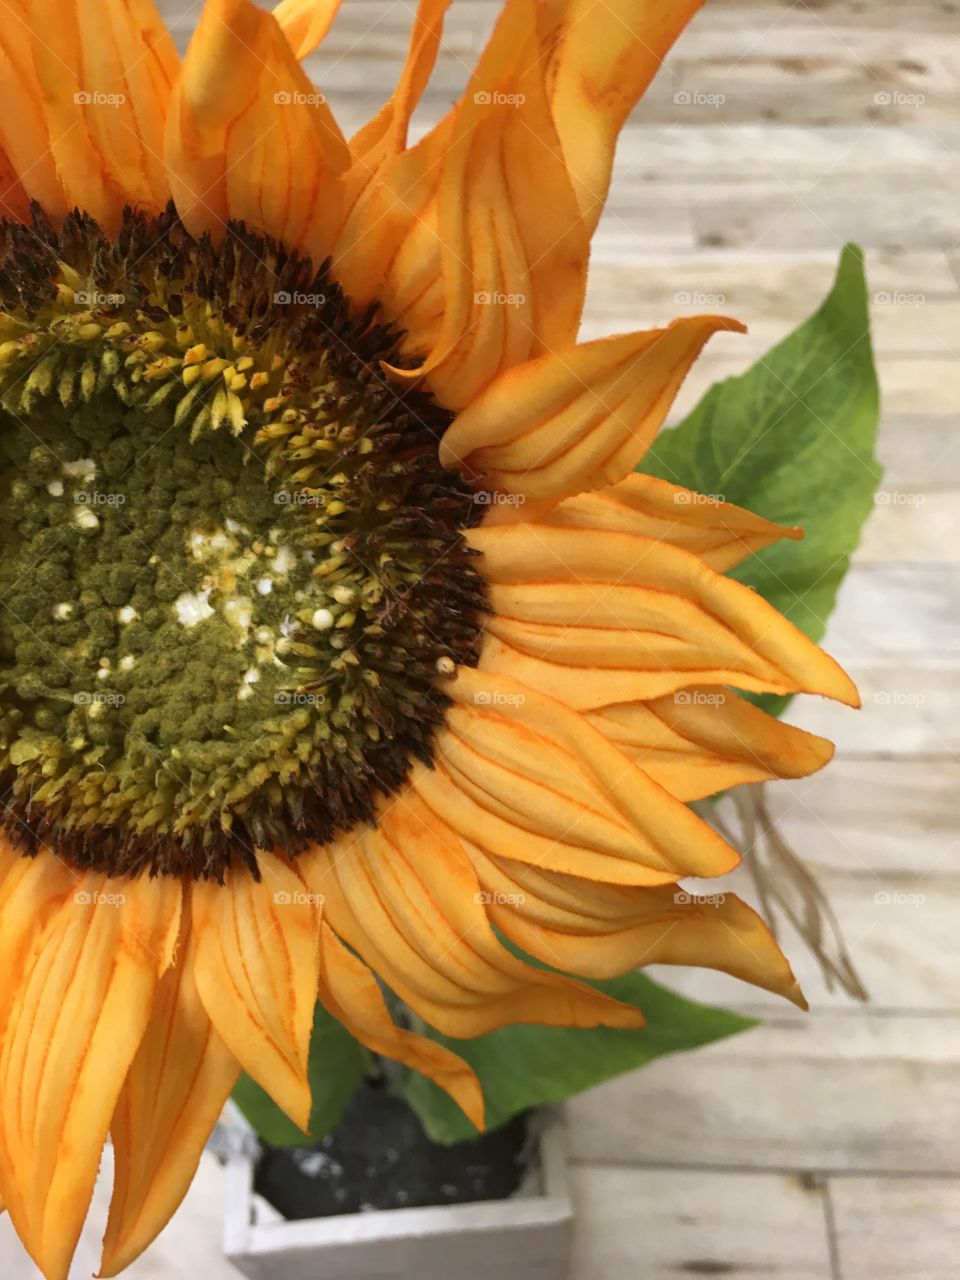 This gorgeous sun flower represents a yellowish ton of yellow 